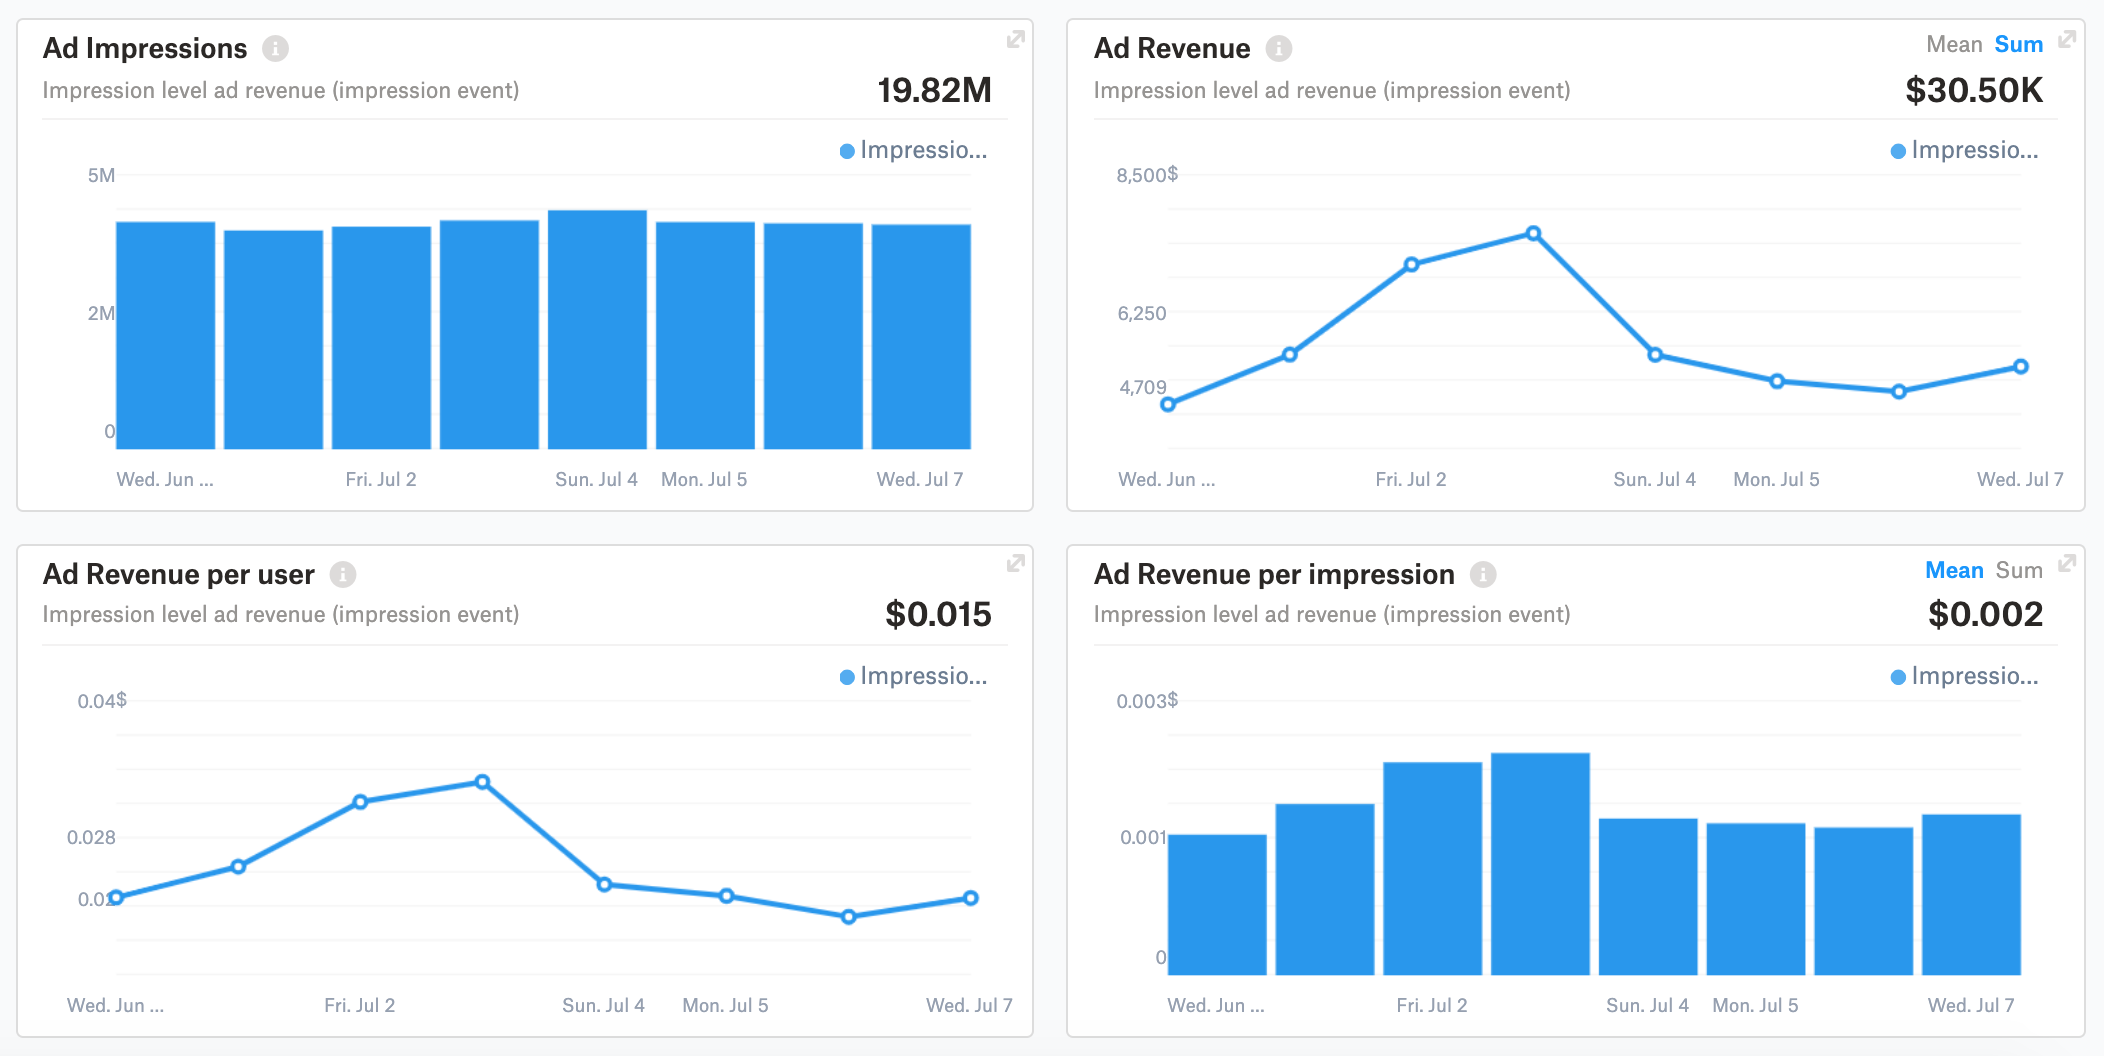 ad revenue data from max in gameanalytics